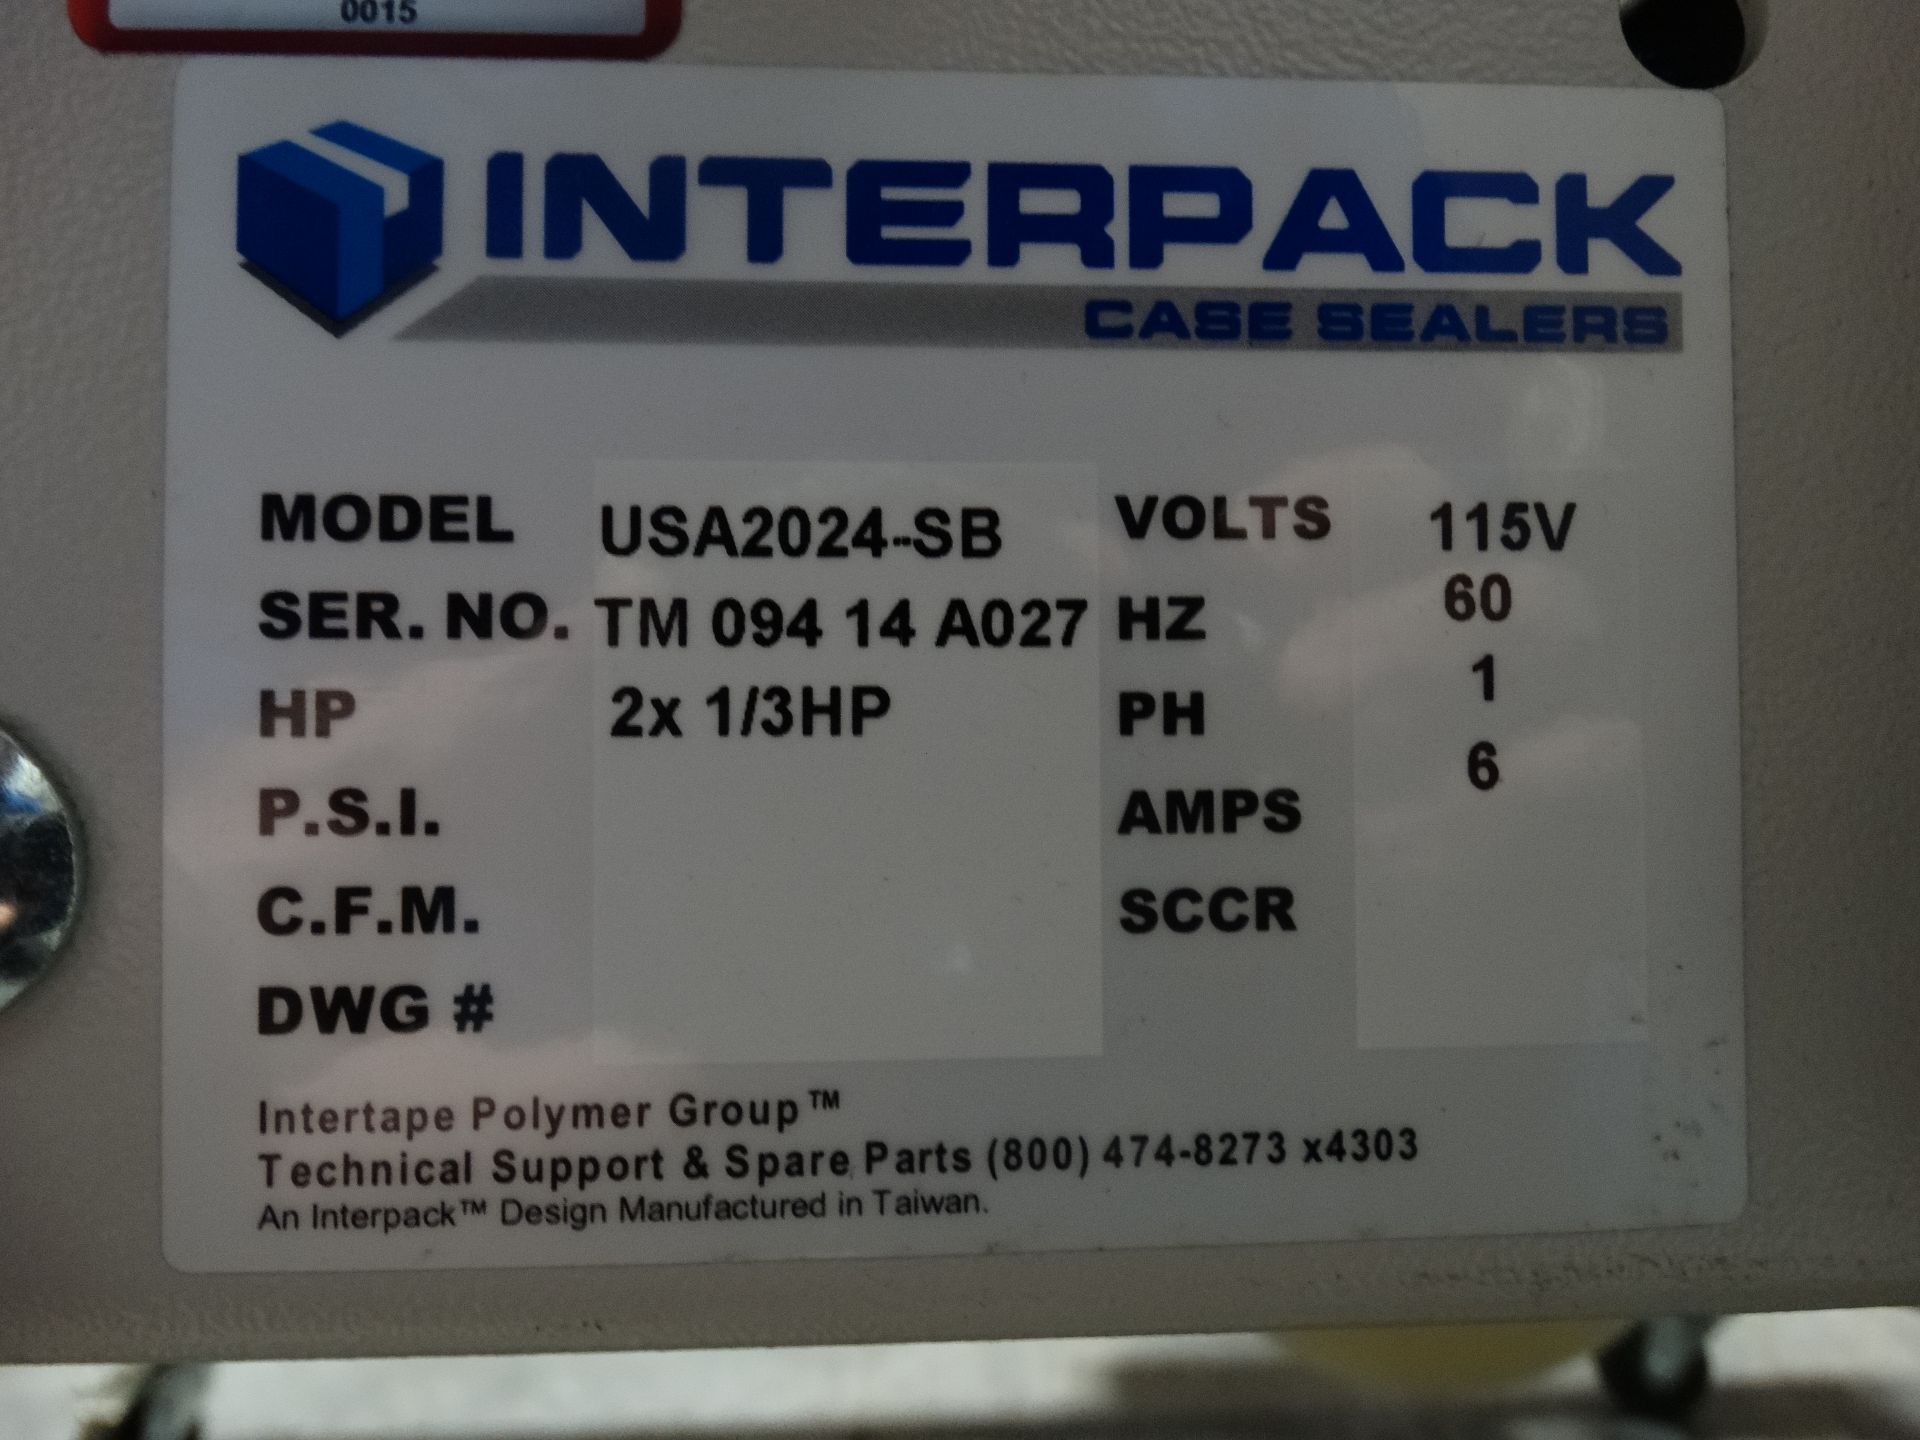 Interpack USA 2024 SB Top and Bottom Case Sealer H6651 - Image 6 of 6